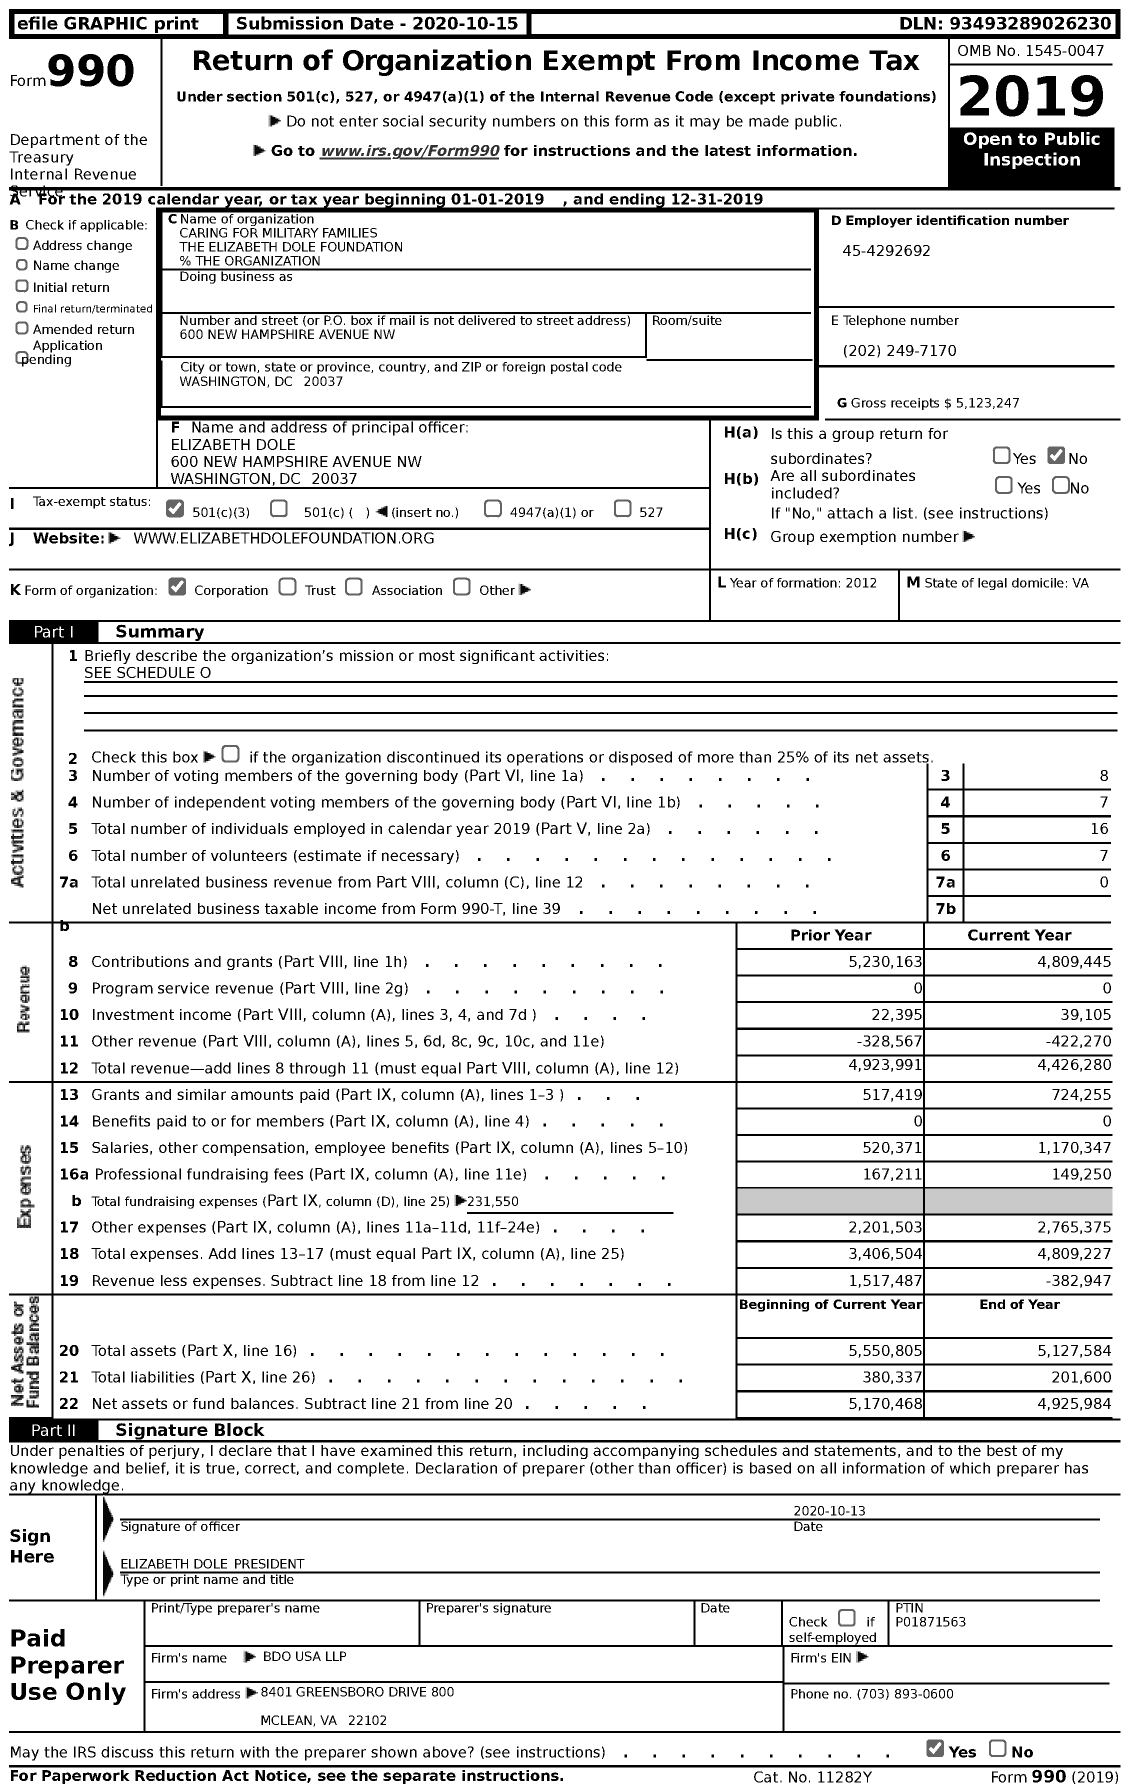 Image of first page of 2019 Form 990 for Caring for Military Families The Elizabeth Dole Foundation